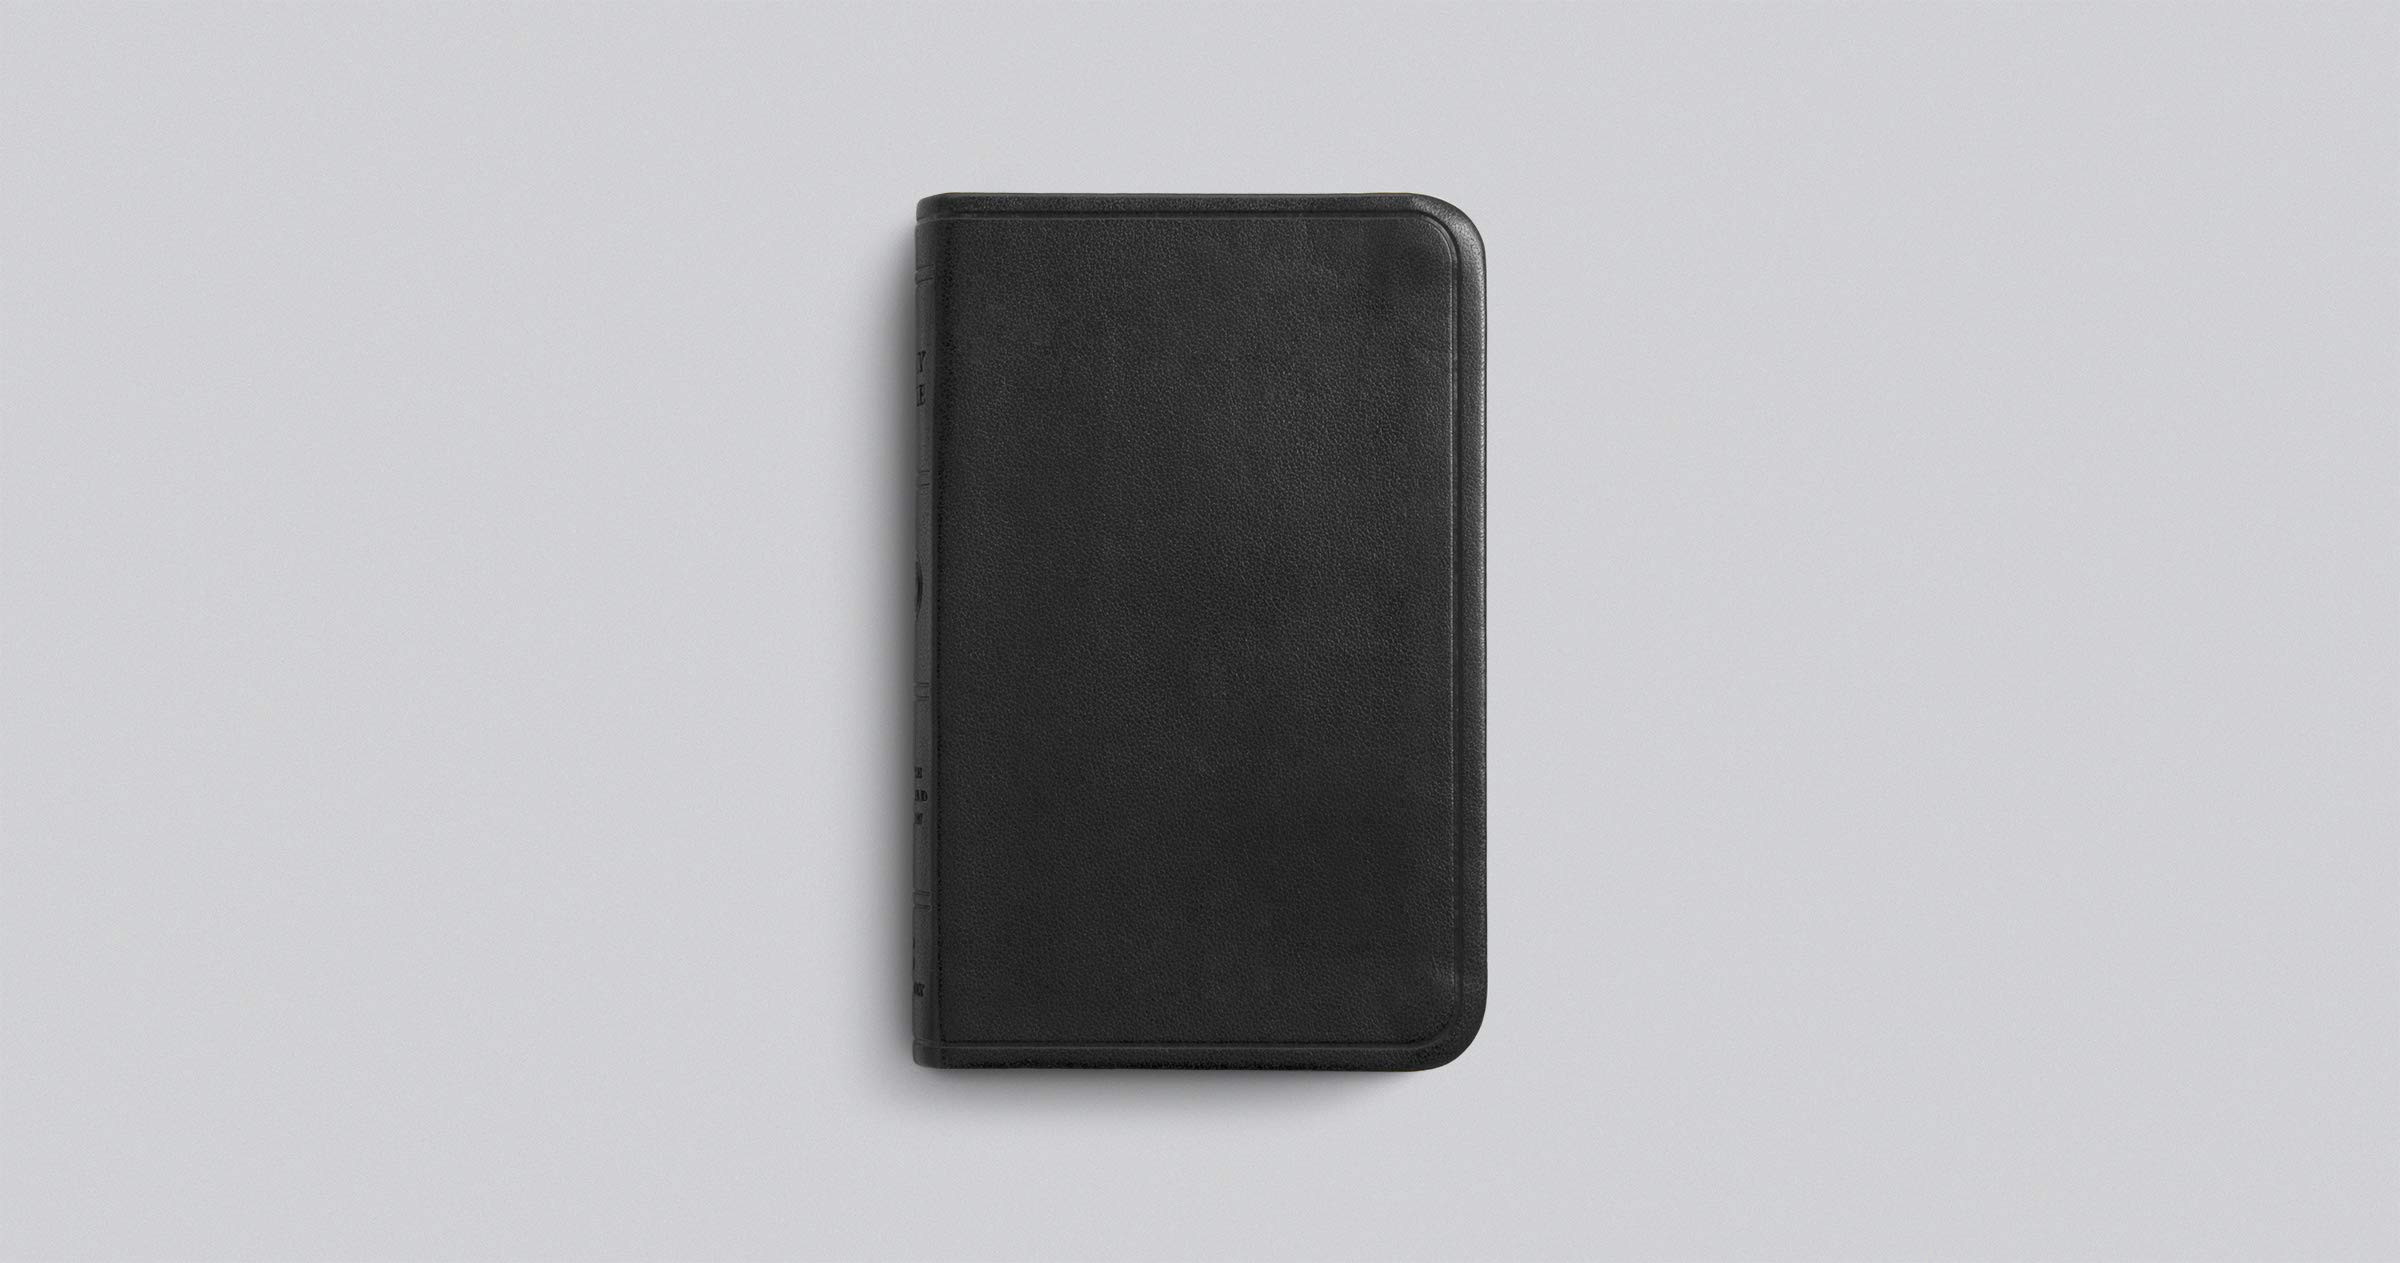 ESV Vest Pocket New Testament with Psalms and Proverbs (TruTone, Black)